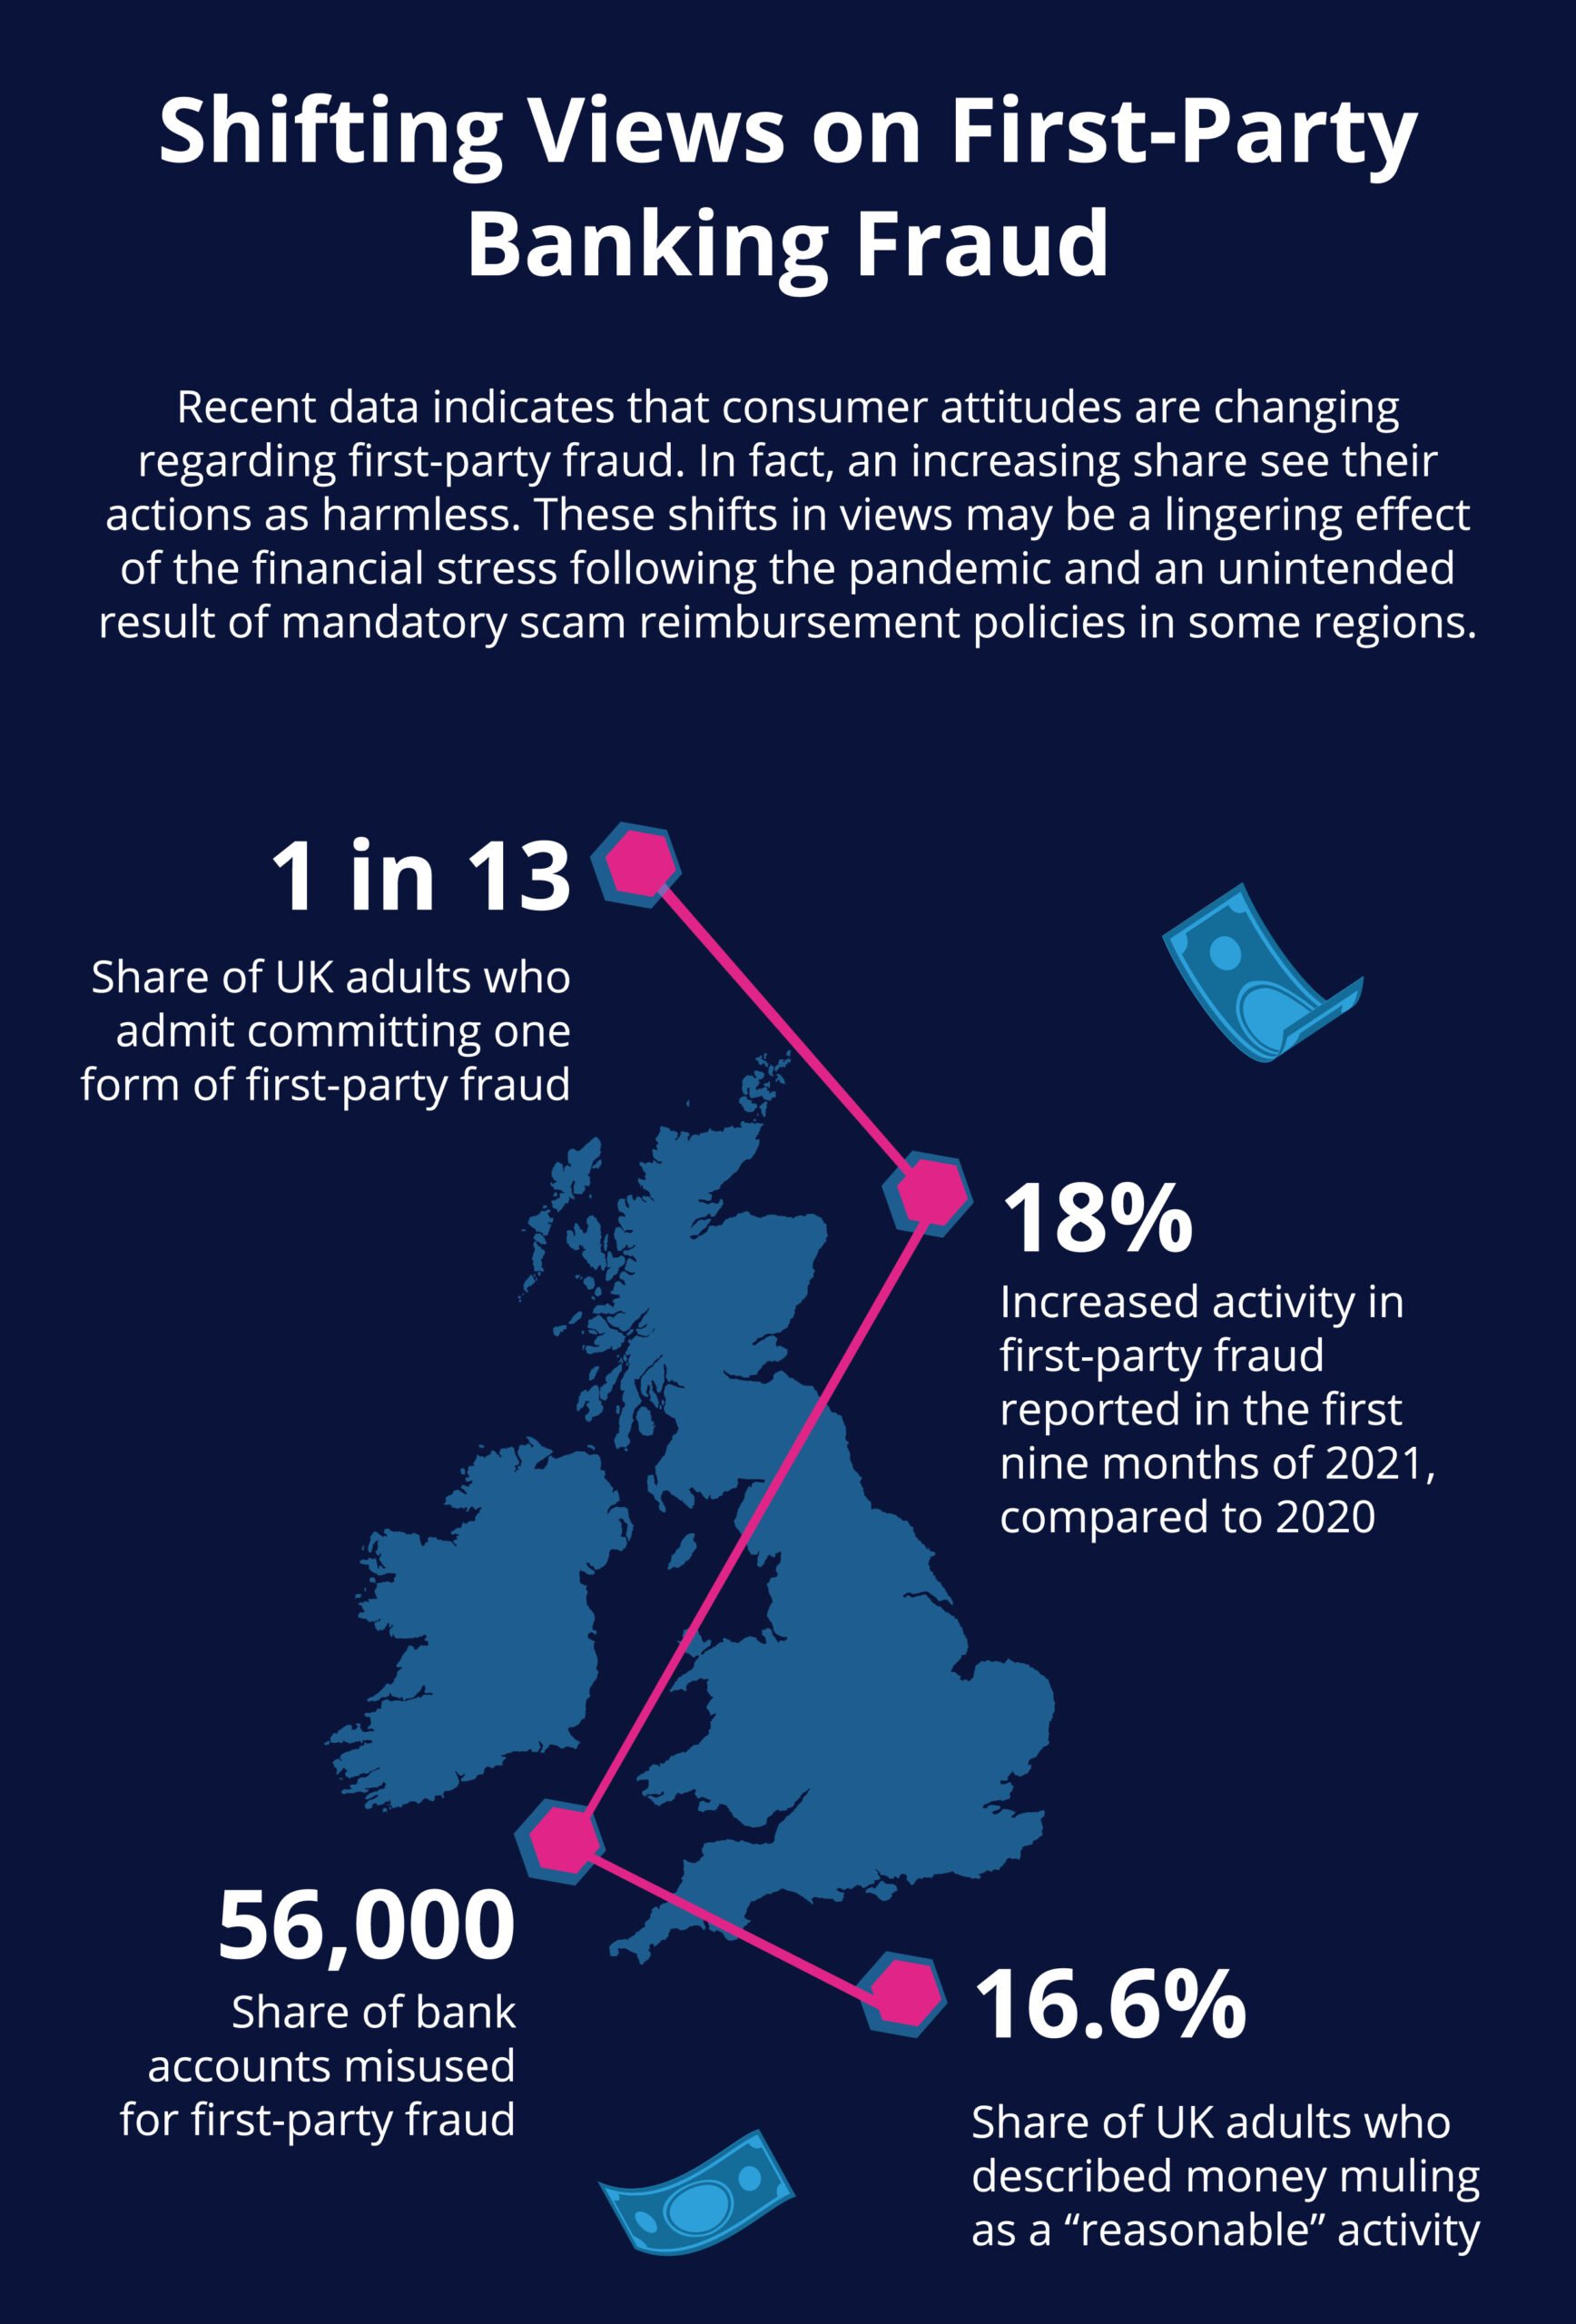 Infographic outlining shifting views of first-party fraud in banking in the United Kingdom